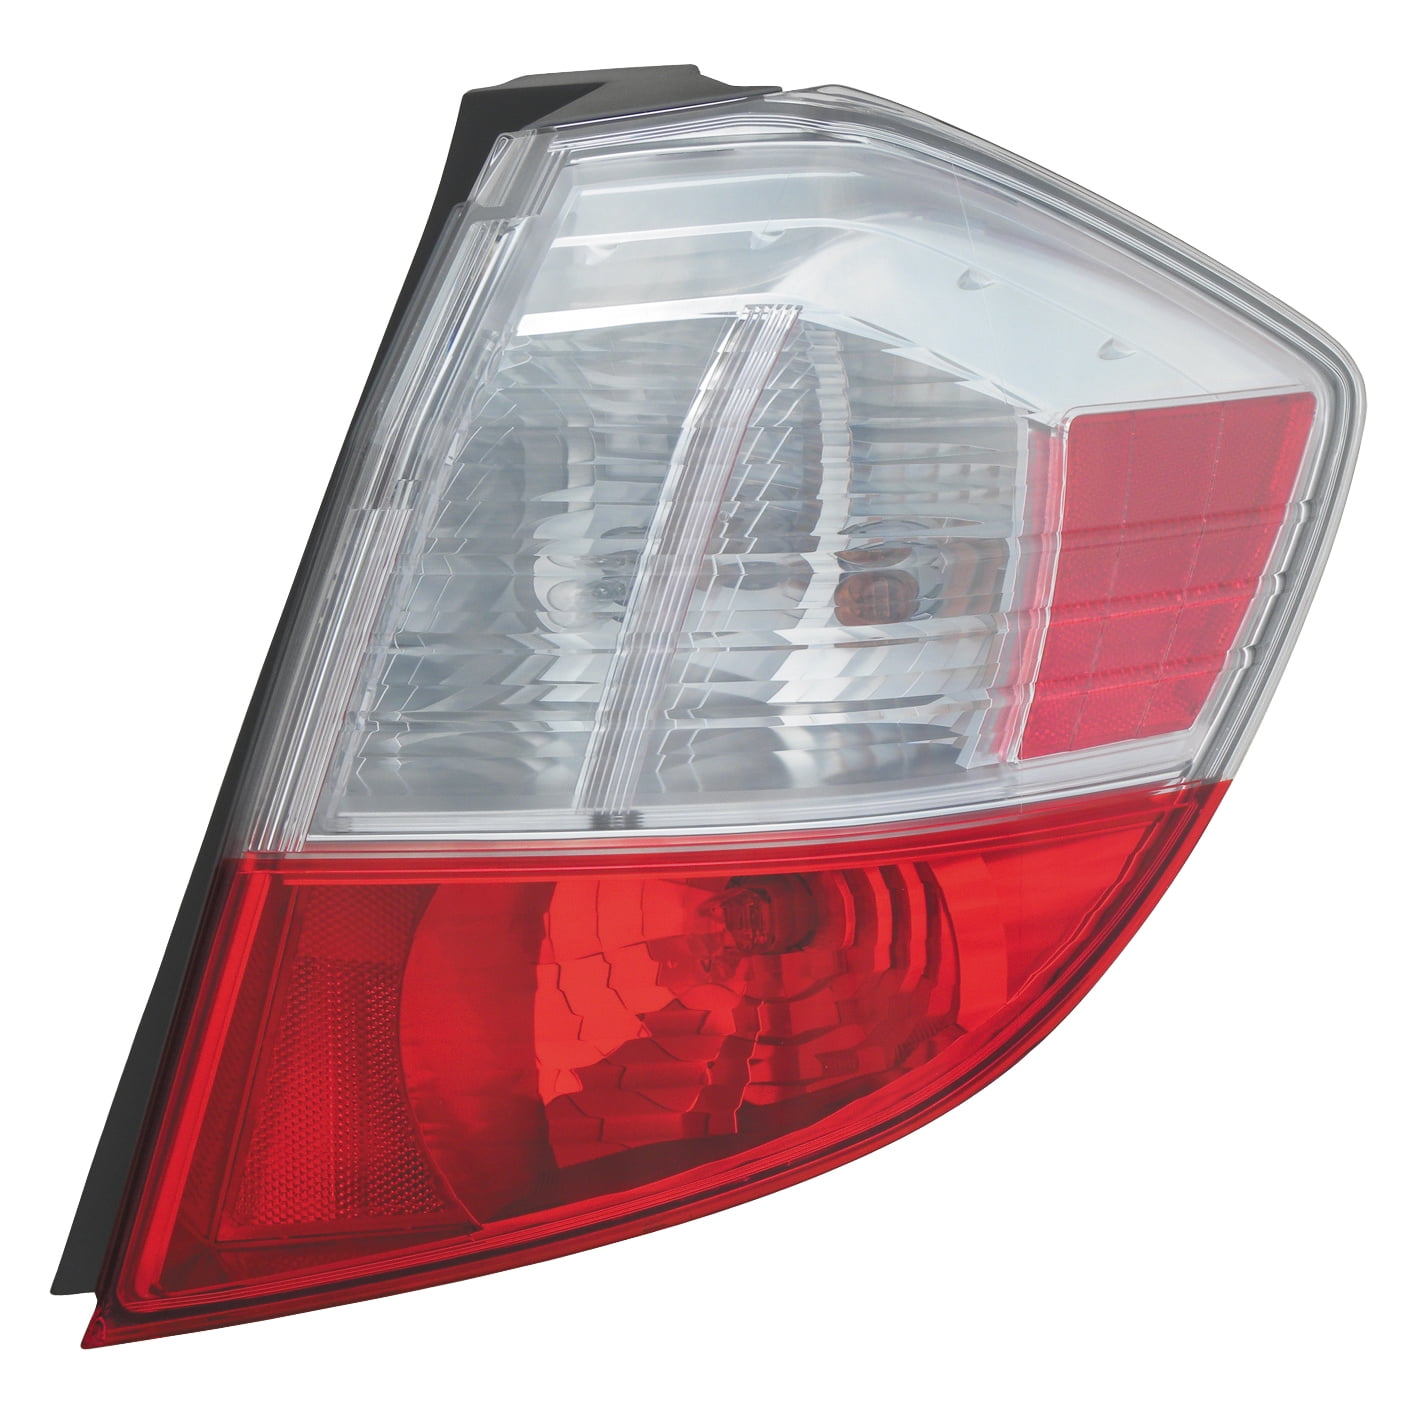 Tail Light Rear Back Lamp for 09-11 Honda Fit Passenger Right - Walmart.com - Walmart.com 2009 Honda Fit Brake Light Bulb Replacement